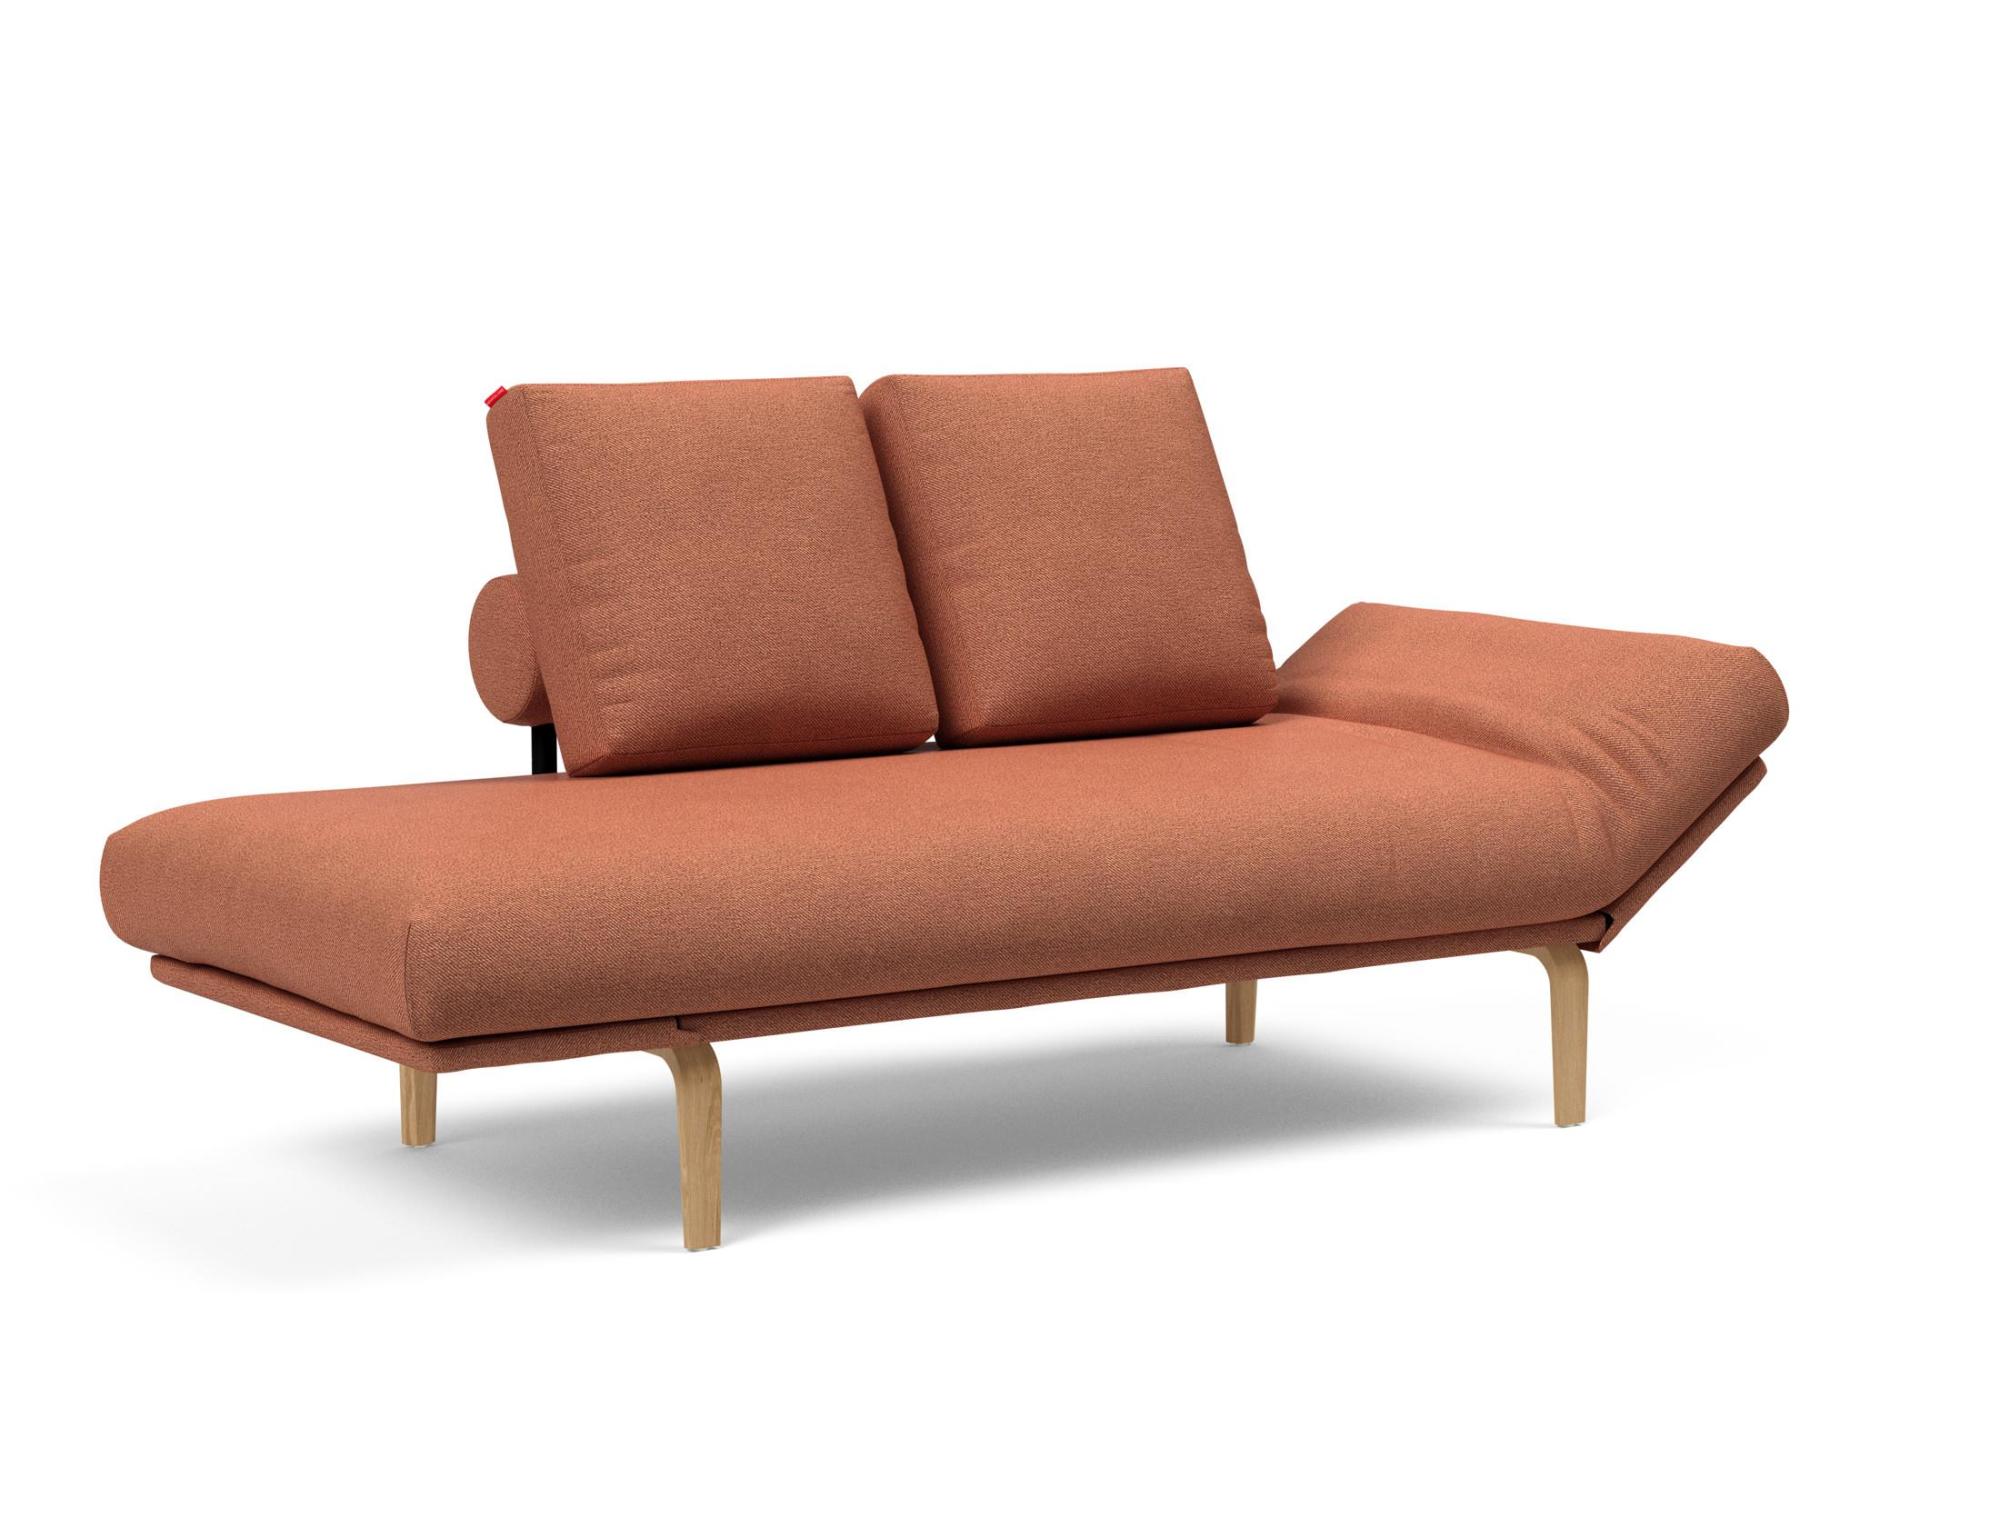 Liege/Daybed Sofas Innovation - Liege/Daybed Rollo